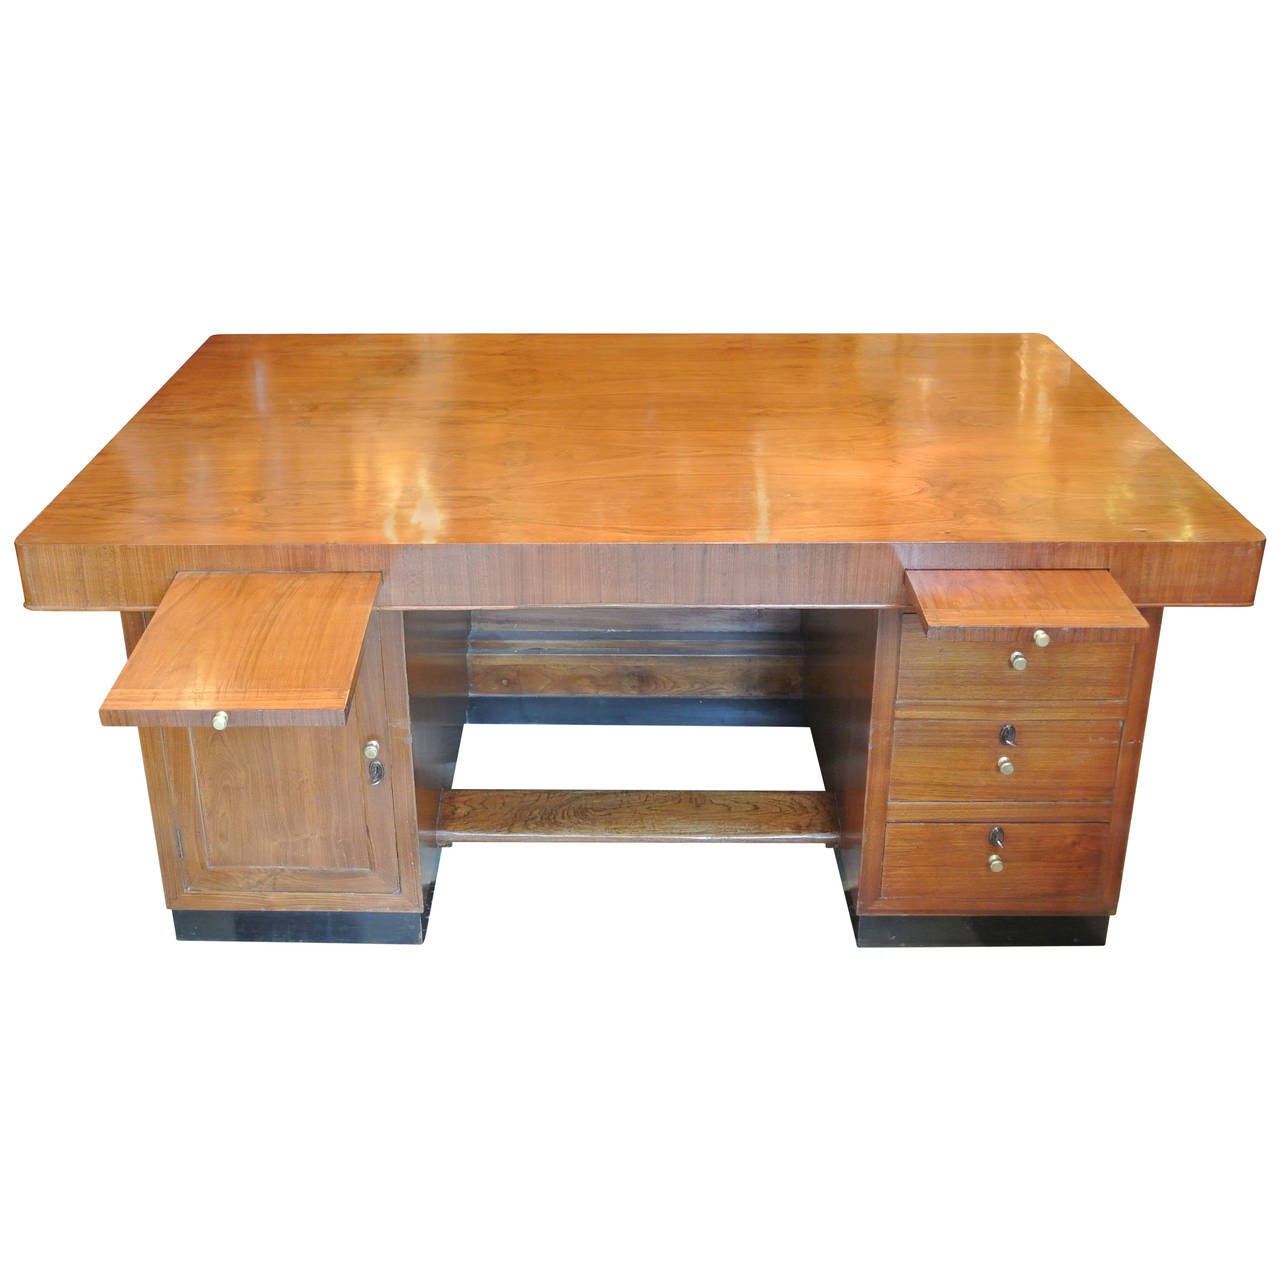 Superior Quality Mid-Century Modern Desk, circa 1950 For Sale at 1stdibs